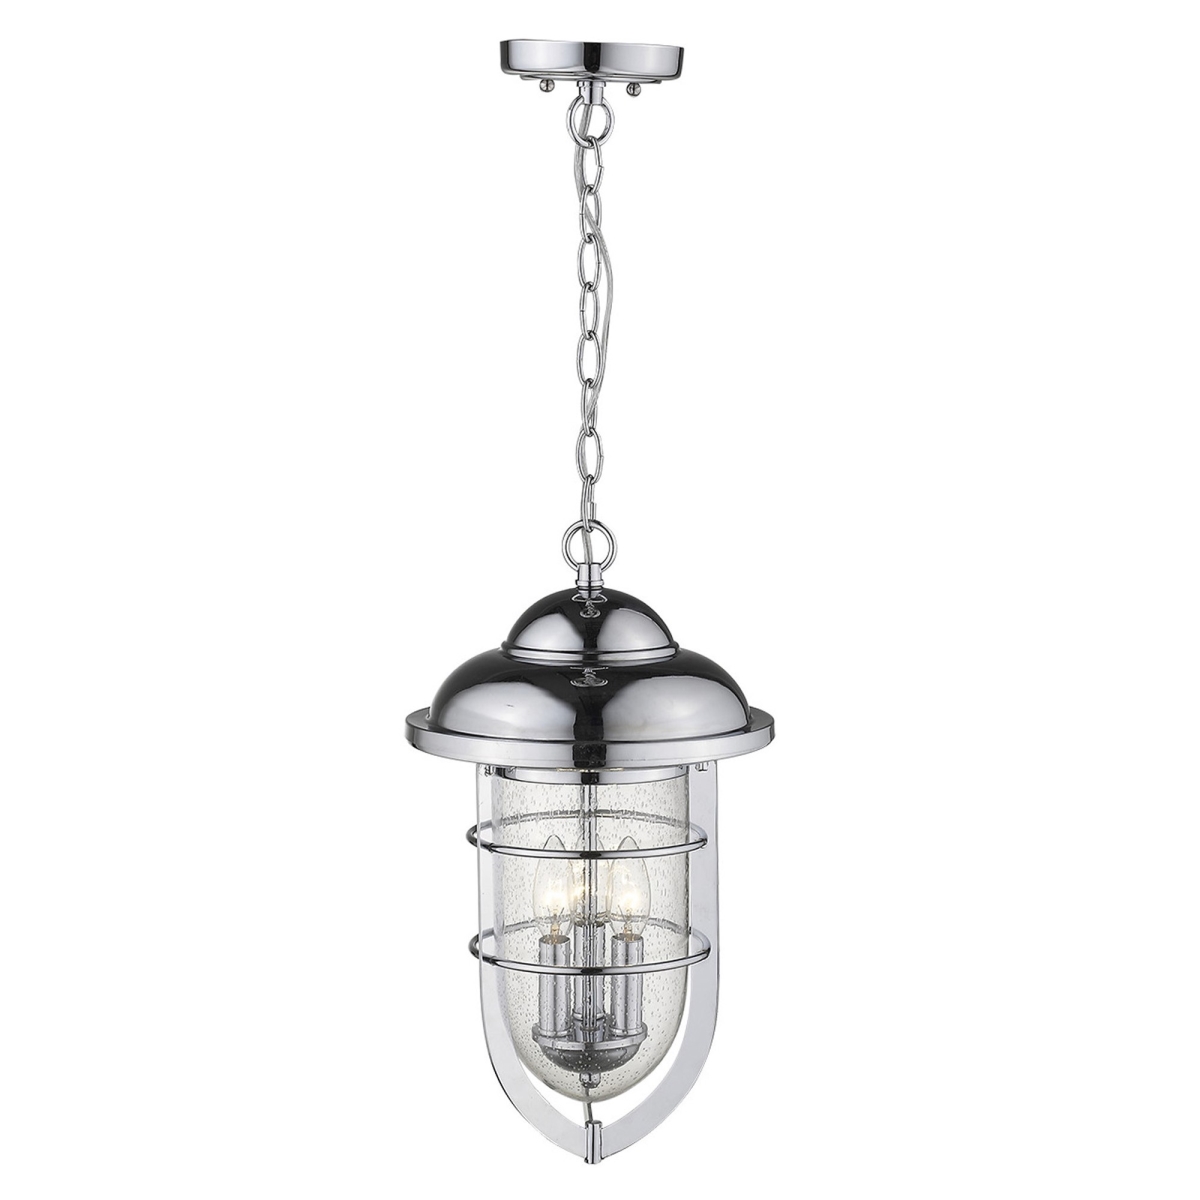 Picture of HomeRoots 397960 18.5 x 10 x 10 in. Dylan 3-Light Chrome Hanging Lantern